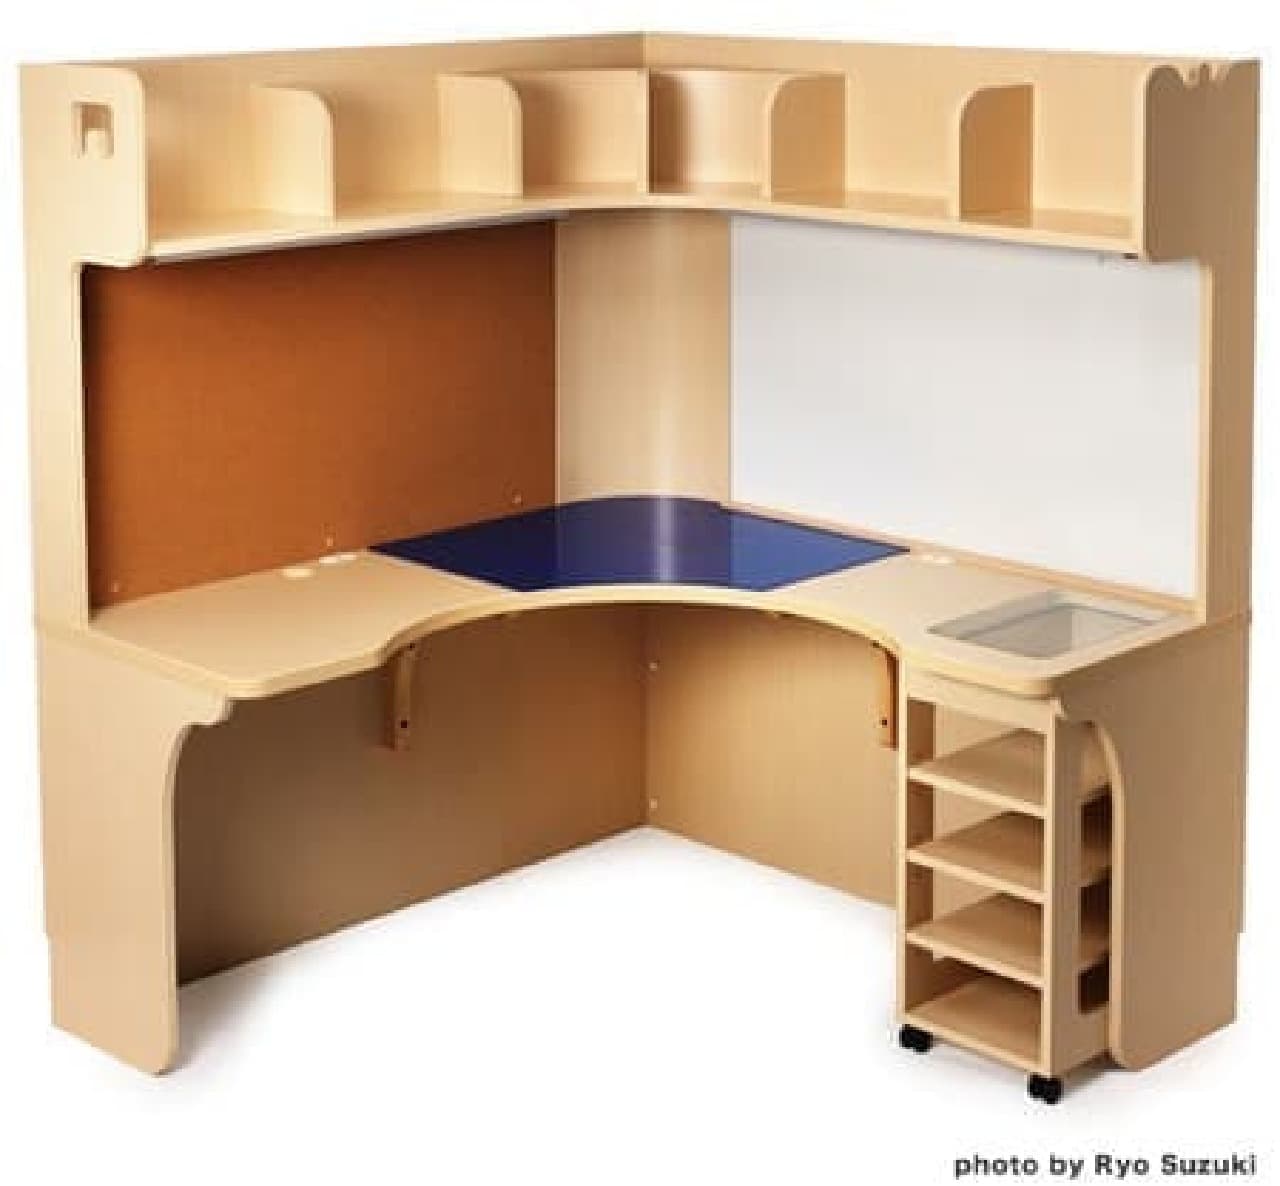 This is characterized by an arc shape consisting of the original "Akamon desk" center and left and right support zones.